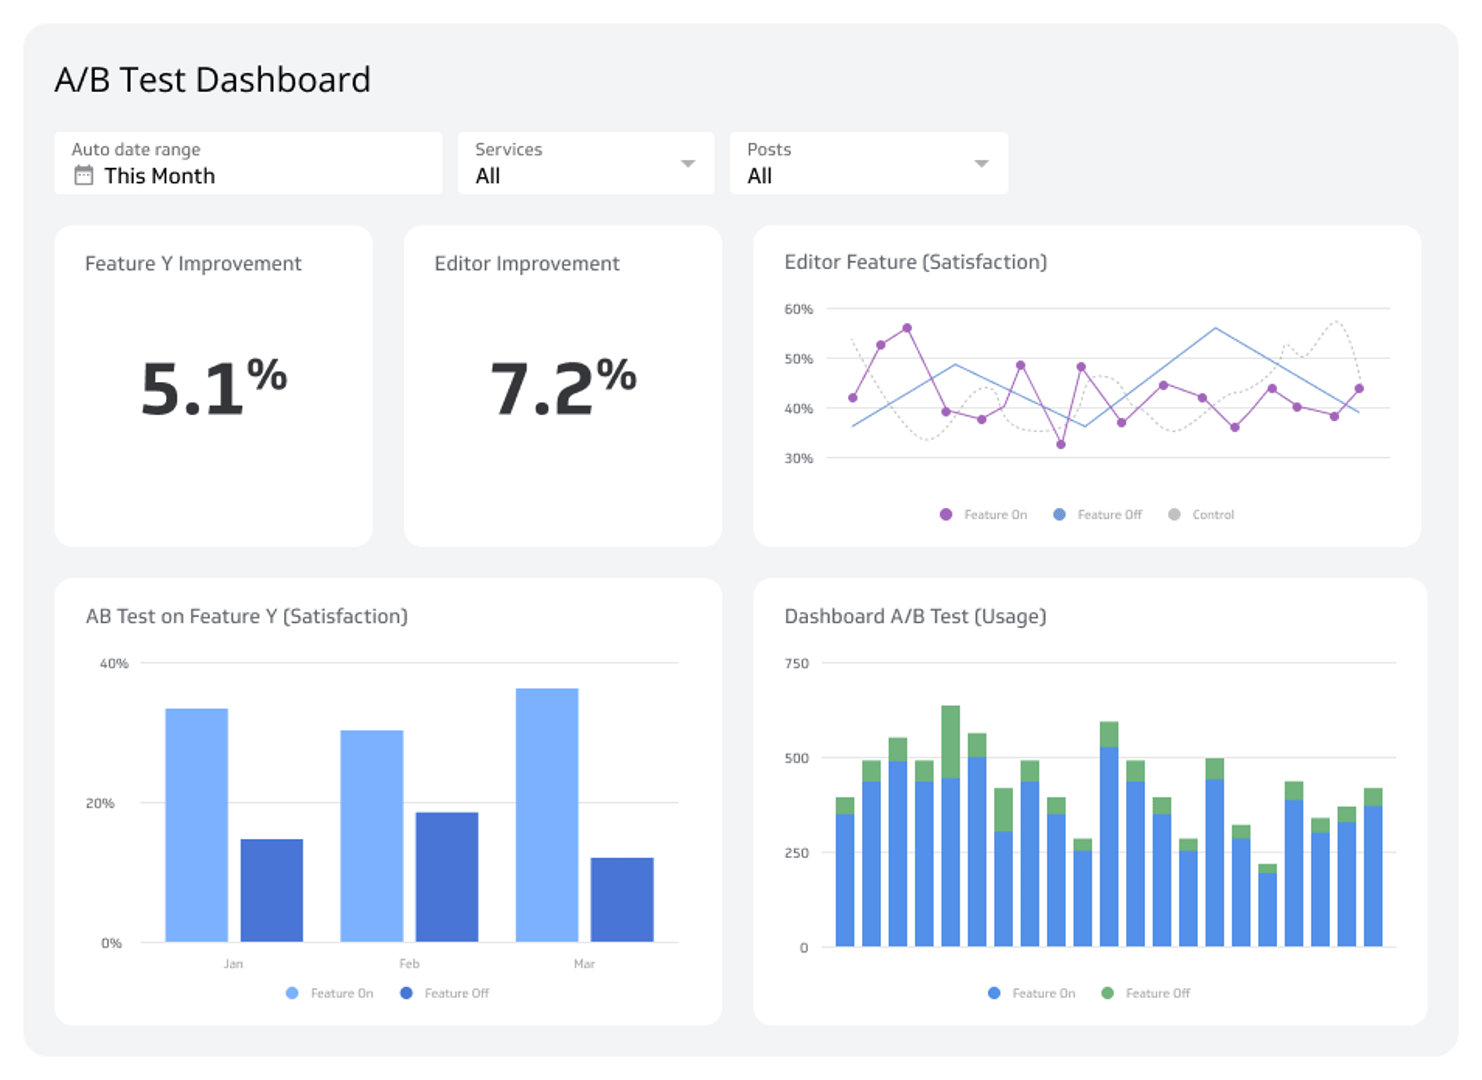 Related Dashboard Examples - A/B Test Dashboard